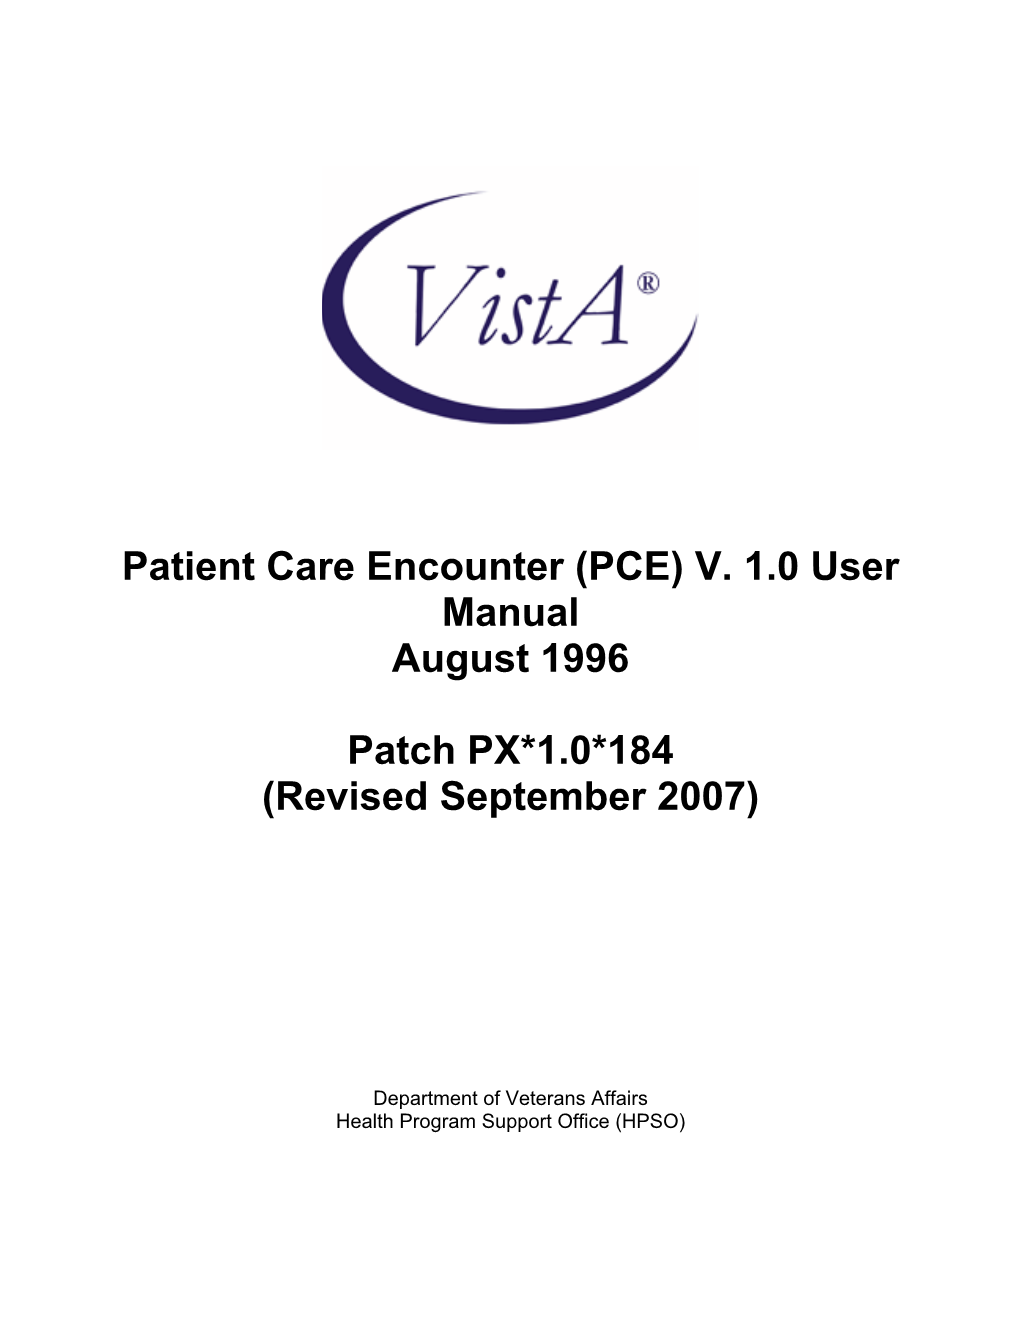 Patient Care Encounter (PCE) V. 1.0 User Manual August 1996 Patch PX